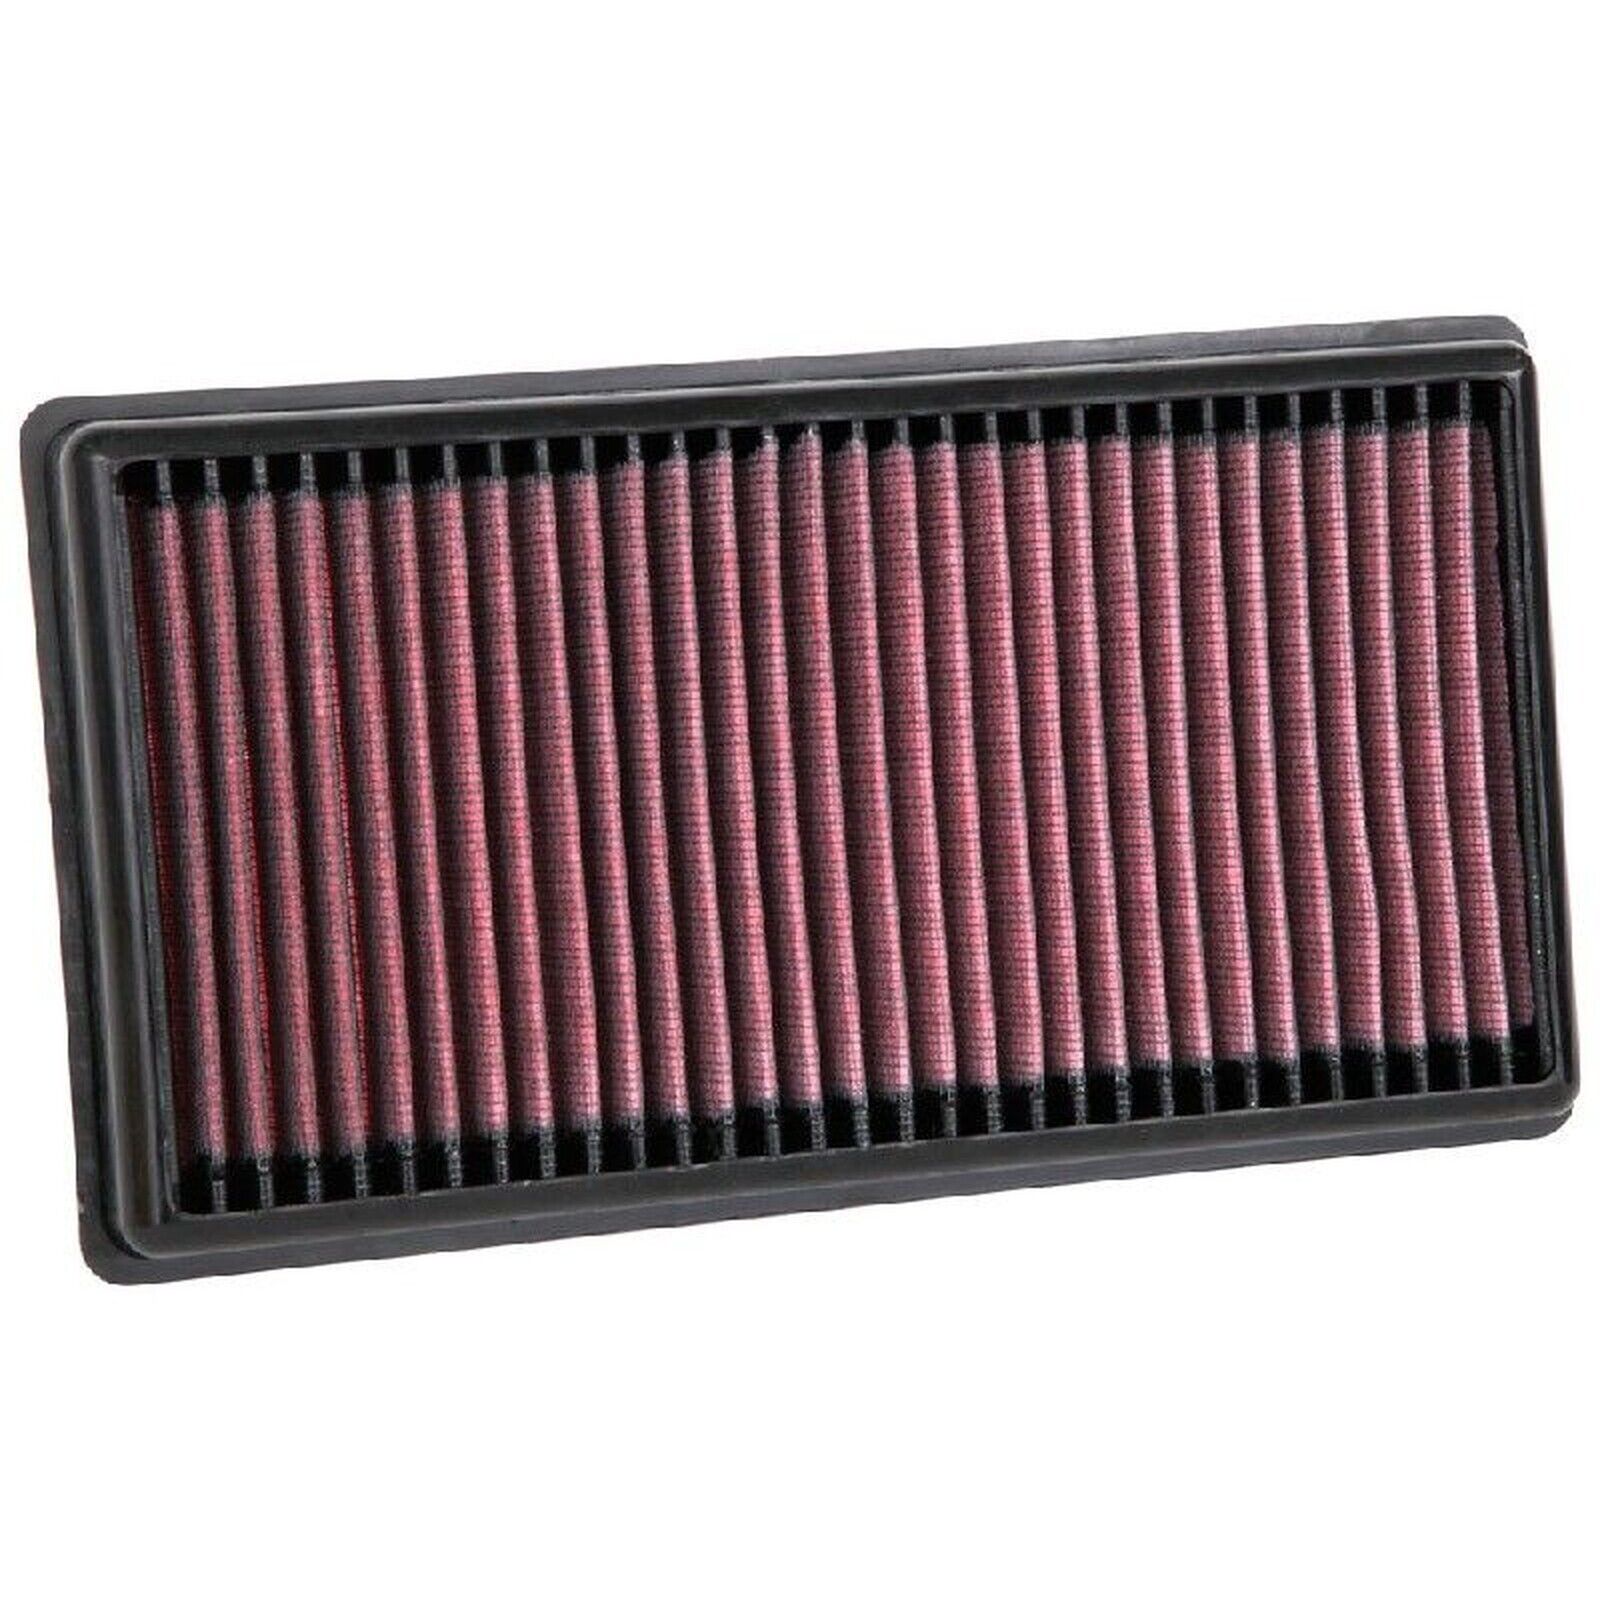 K&N BM-1019 Replacement Air Filter - Reusable - Low Maintenance - Easy Install